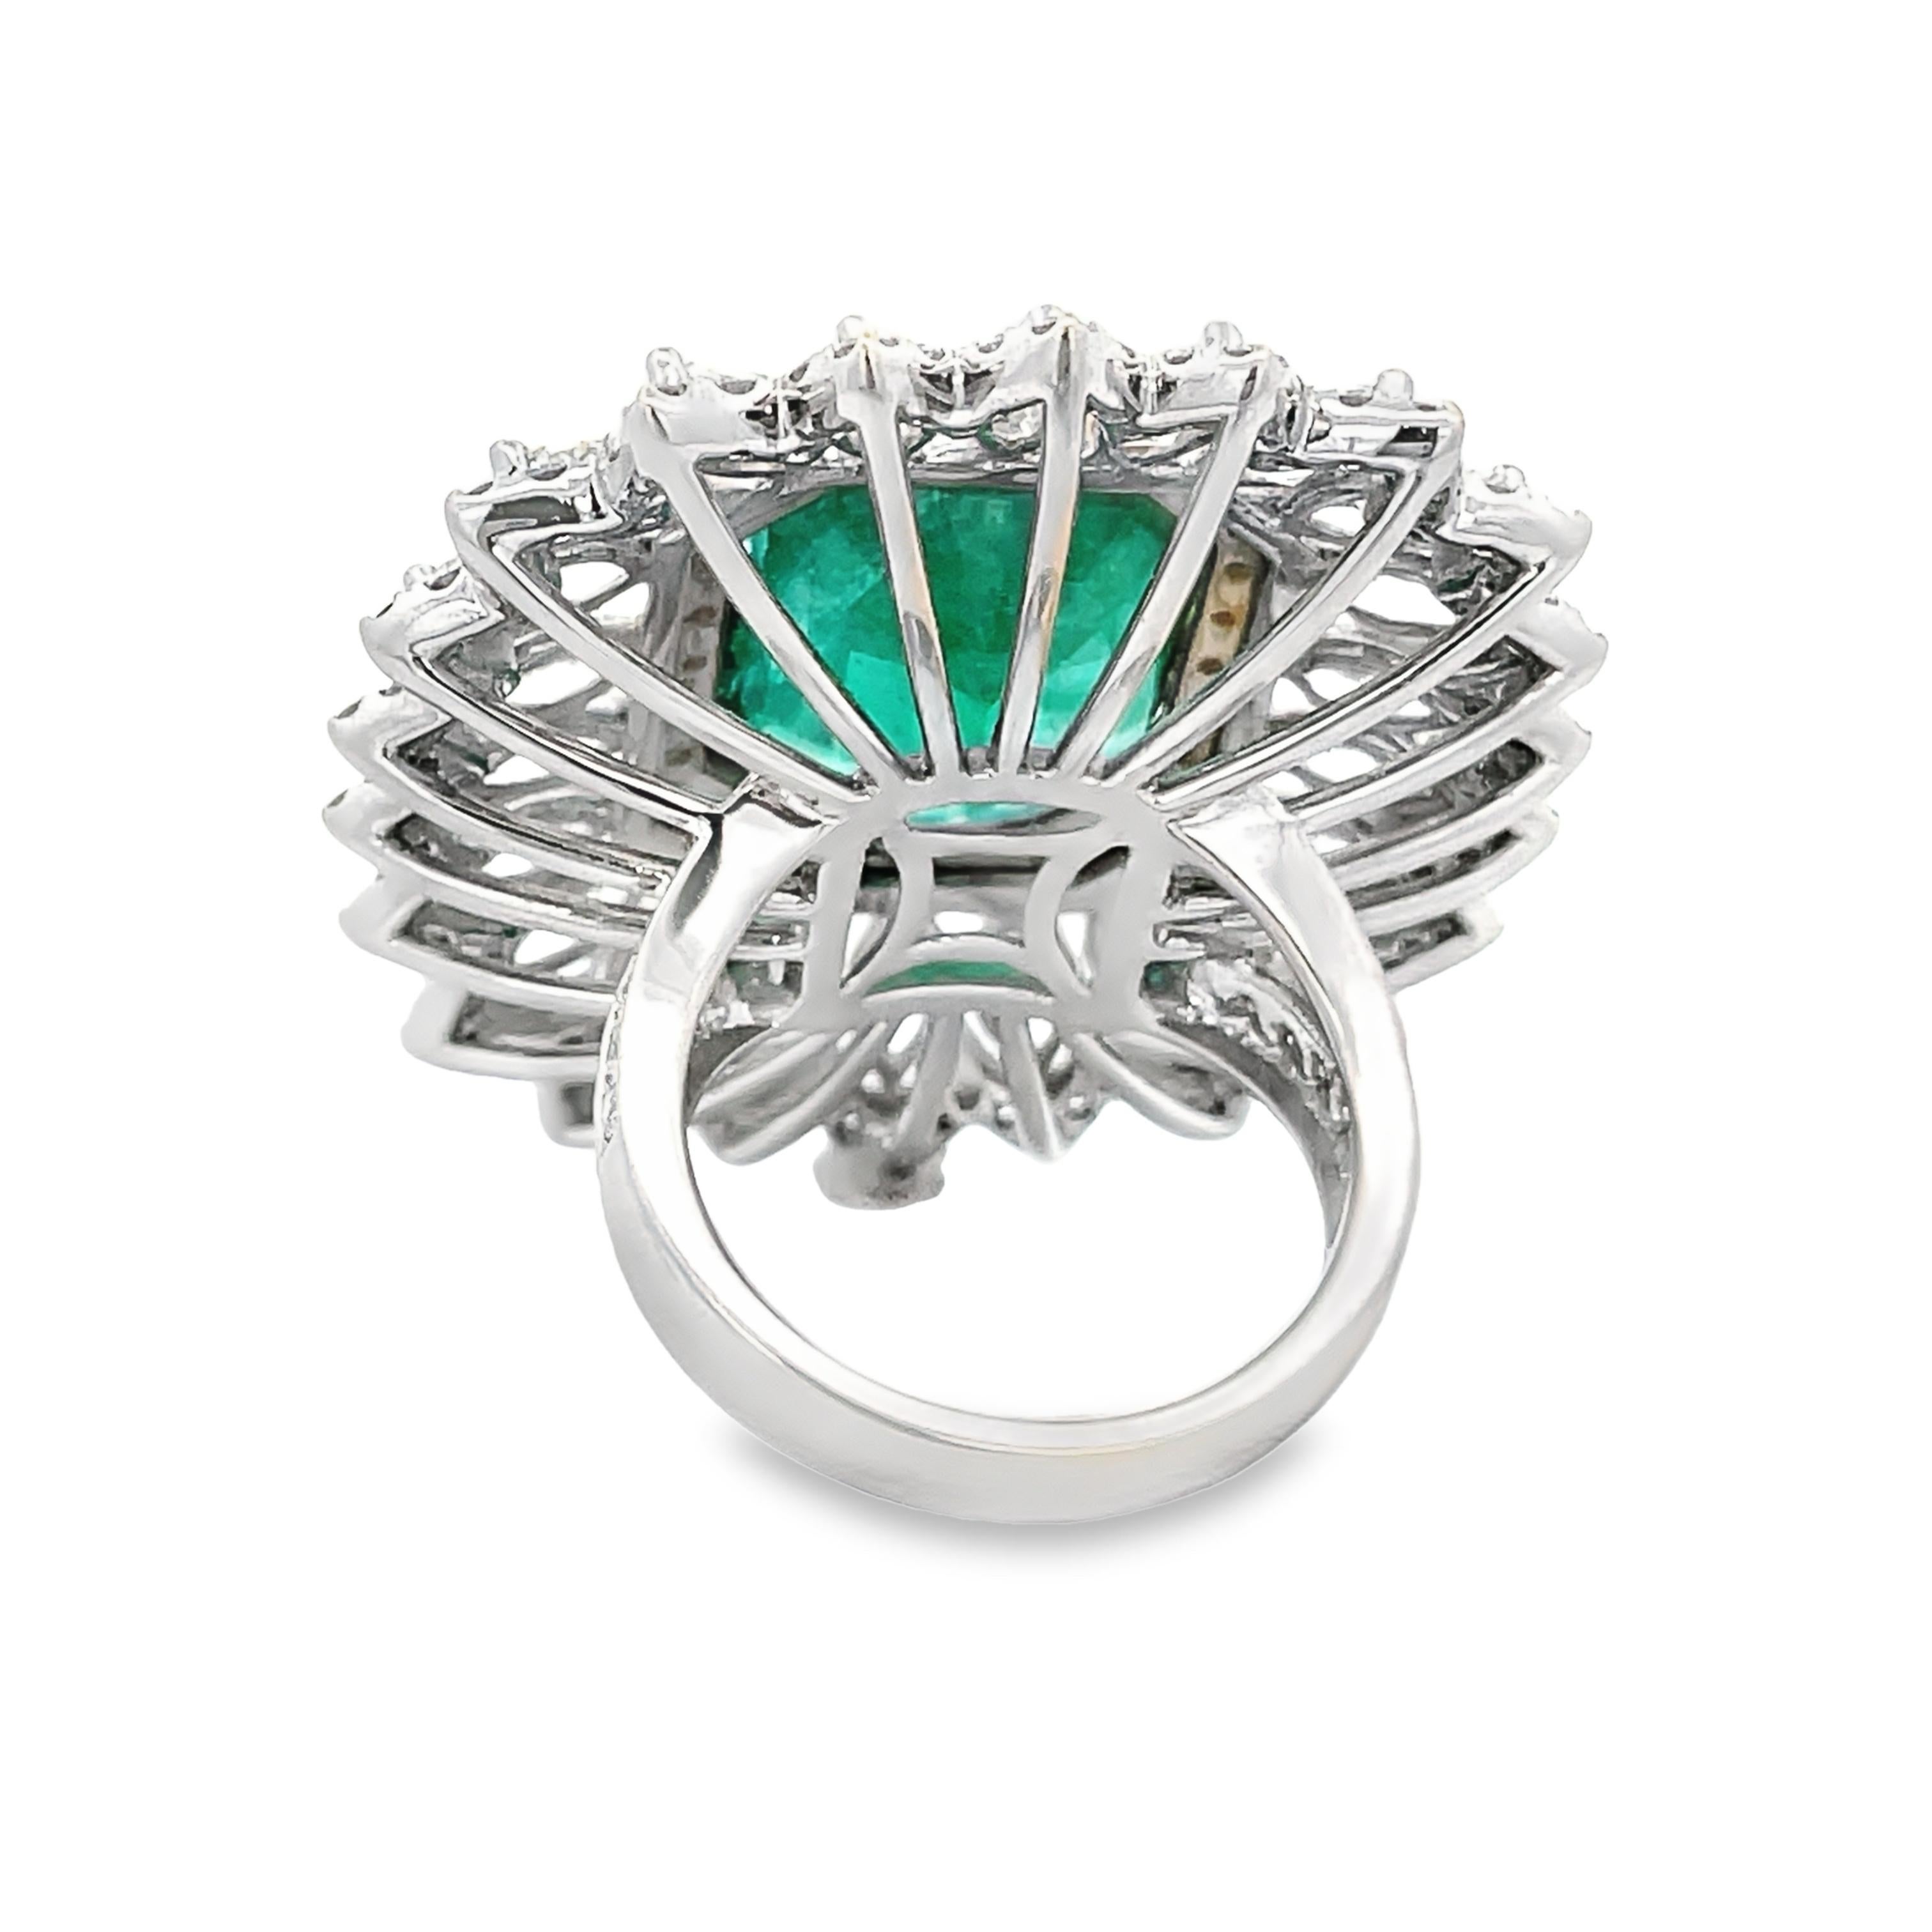 Experience unparalleled luxury with our 18KY/W emerald cushion 13.71 CTW, white diamond round 8.80 CTW, and yellow diamond round 0.91 CTW ring. This breathtaking piece features a mesmerizing emerald cushion surrounded by shimmering white and yellow